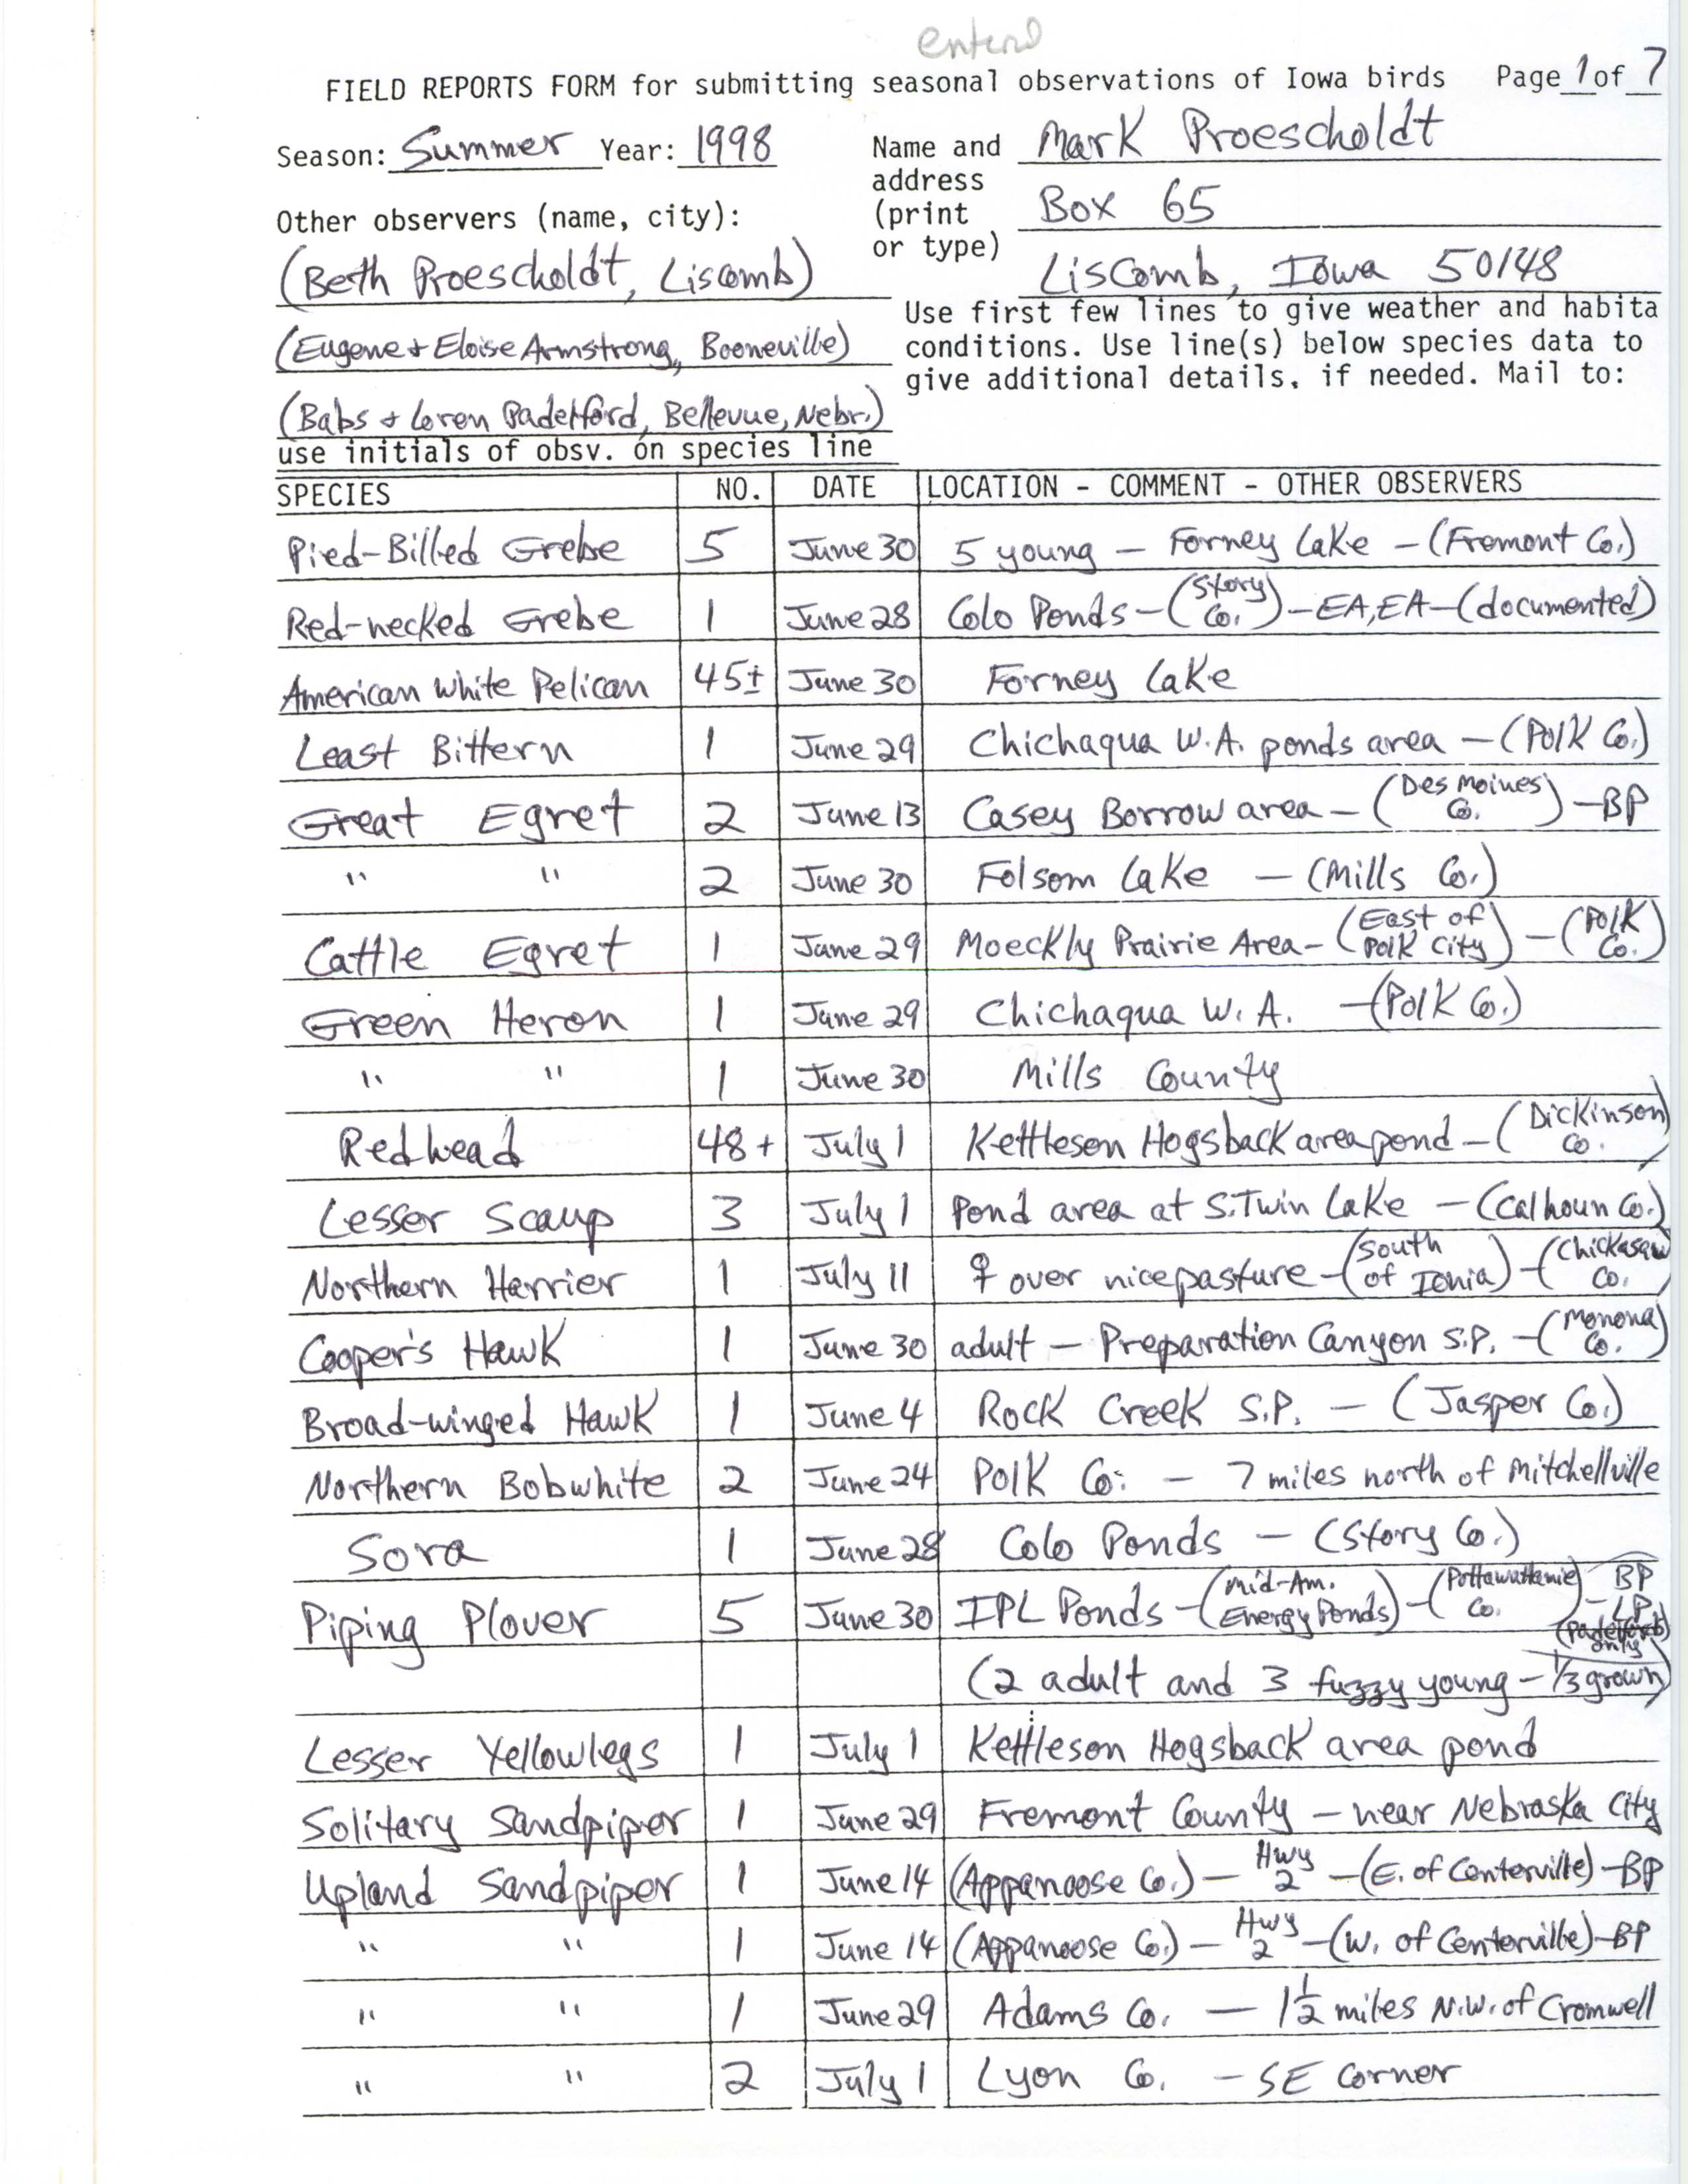 Field reports form for submitting seasonal observations of Iowa birds, Mark Proescholdt, summer 1998